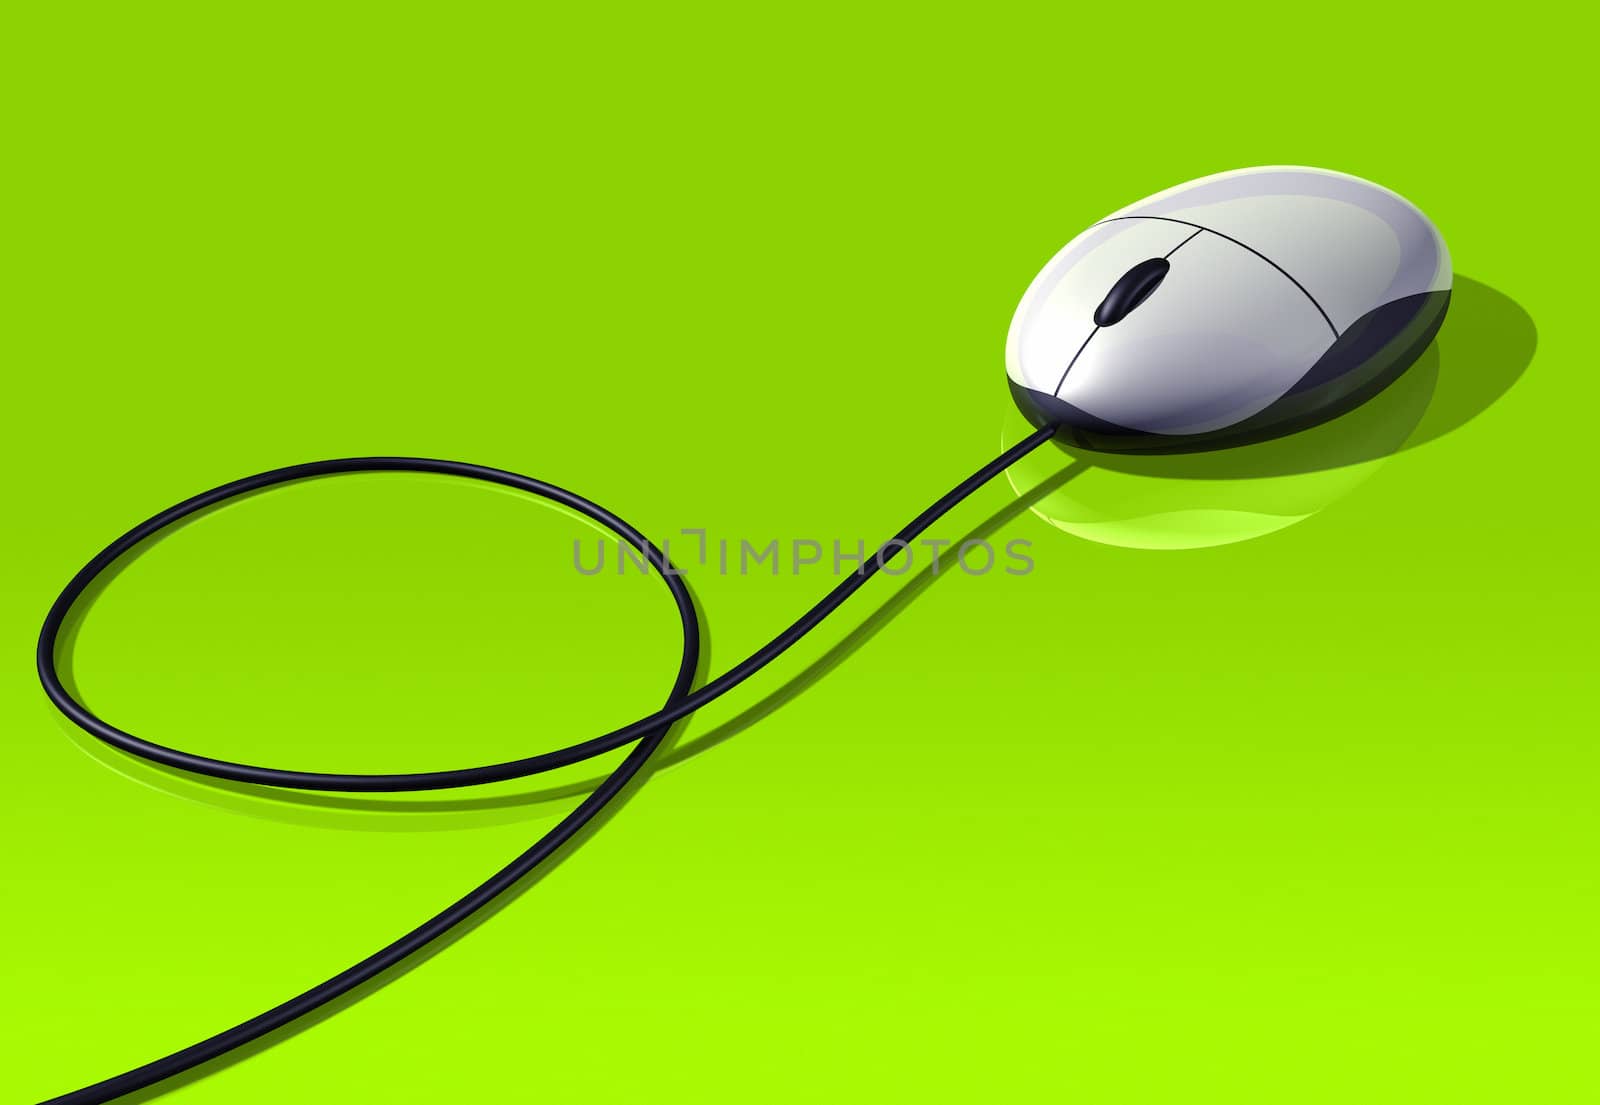 3D white computer mouse isolated on a green background